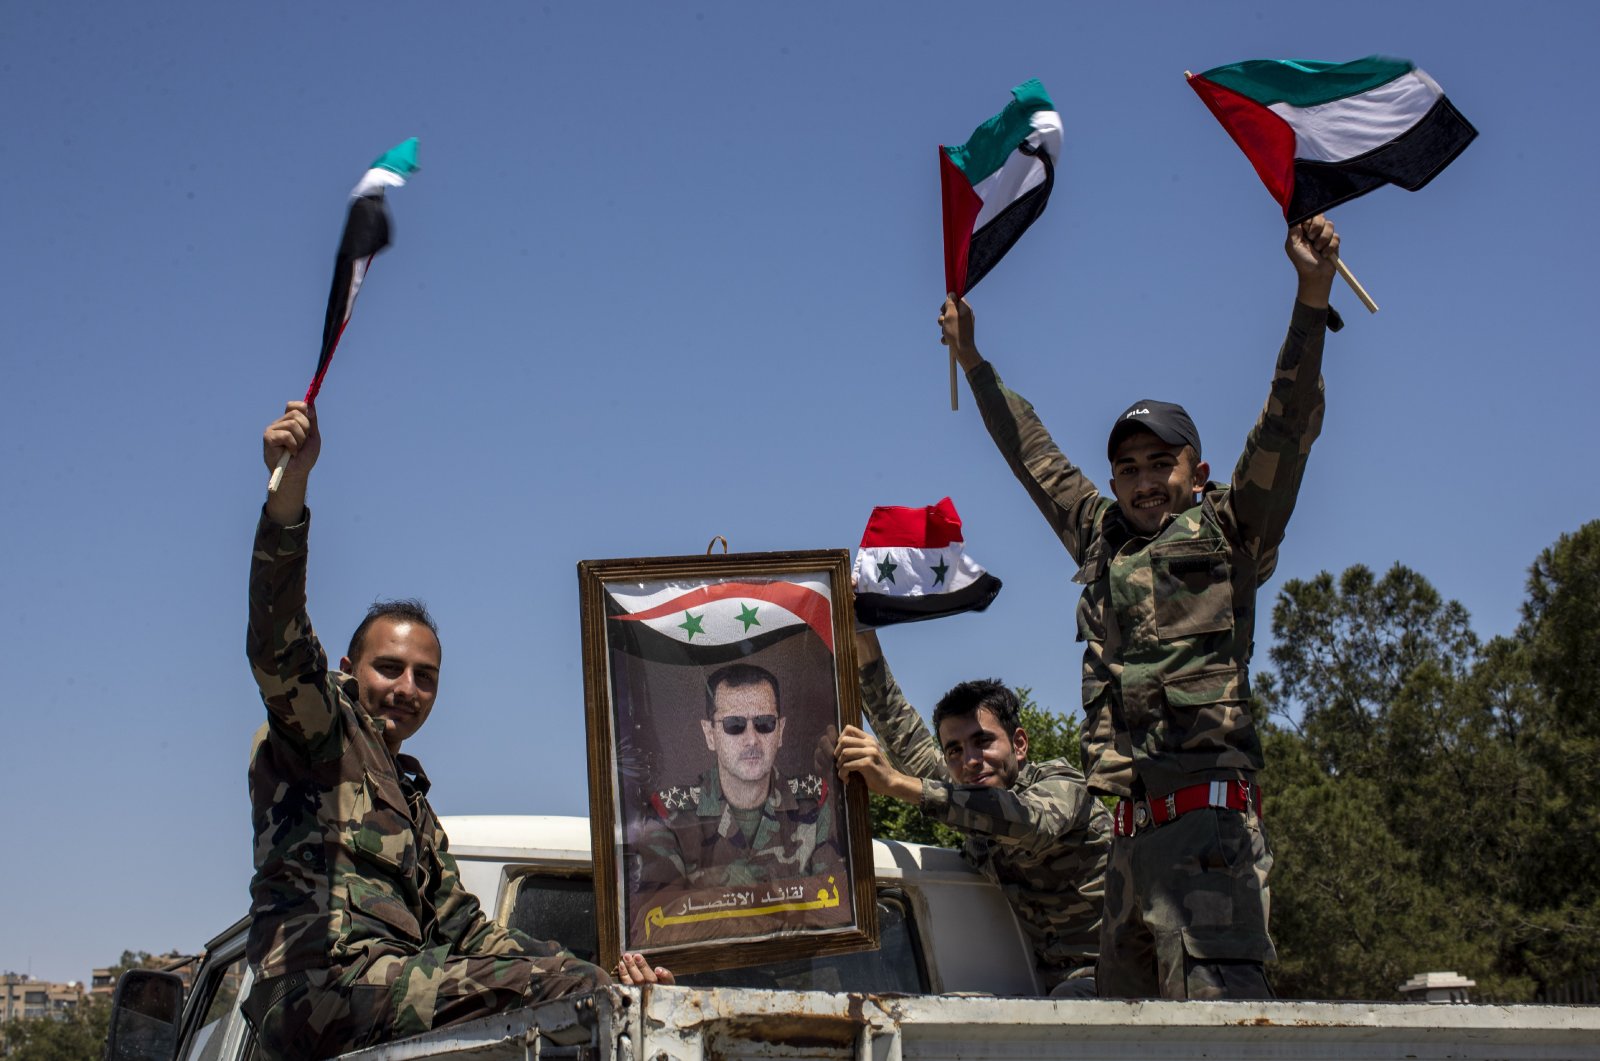 Syrian soldiers hold up Baath party flags and a portrait of Bashar Assad that read in the Arabic language, "Yes to the leader of victory," as they celebrate outside the town of Douma, in the eastern Ghouta region, near the Syrian capital Damascus, Syria, May 26, 2021. (AP Photo)